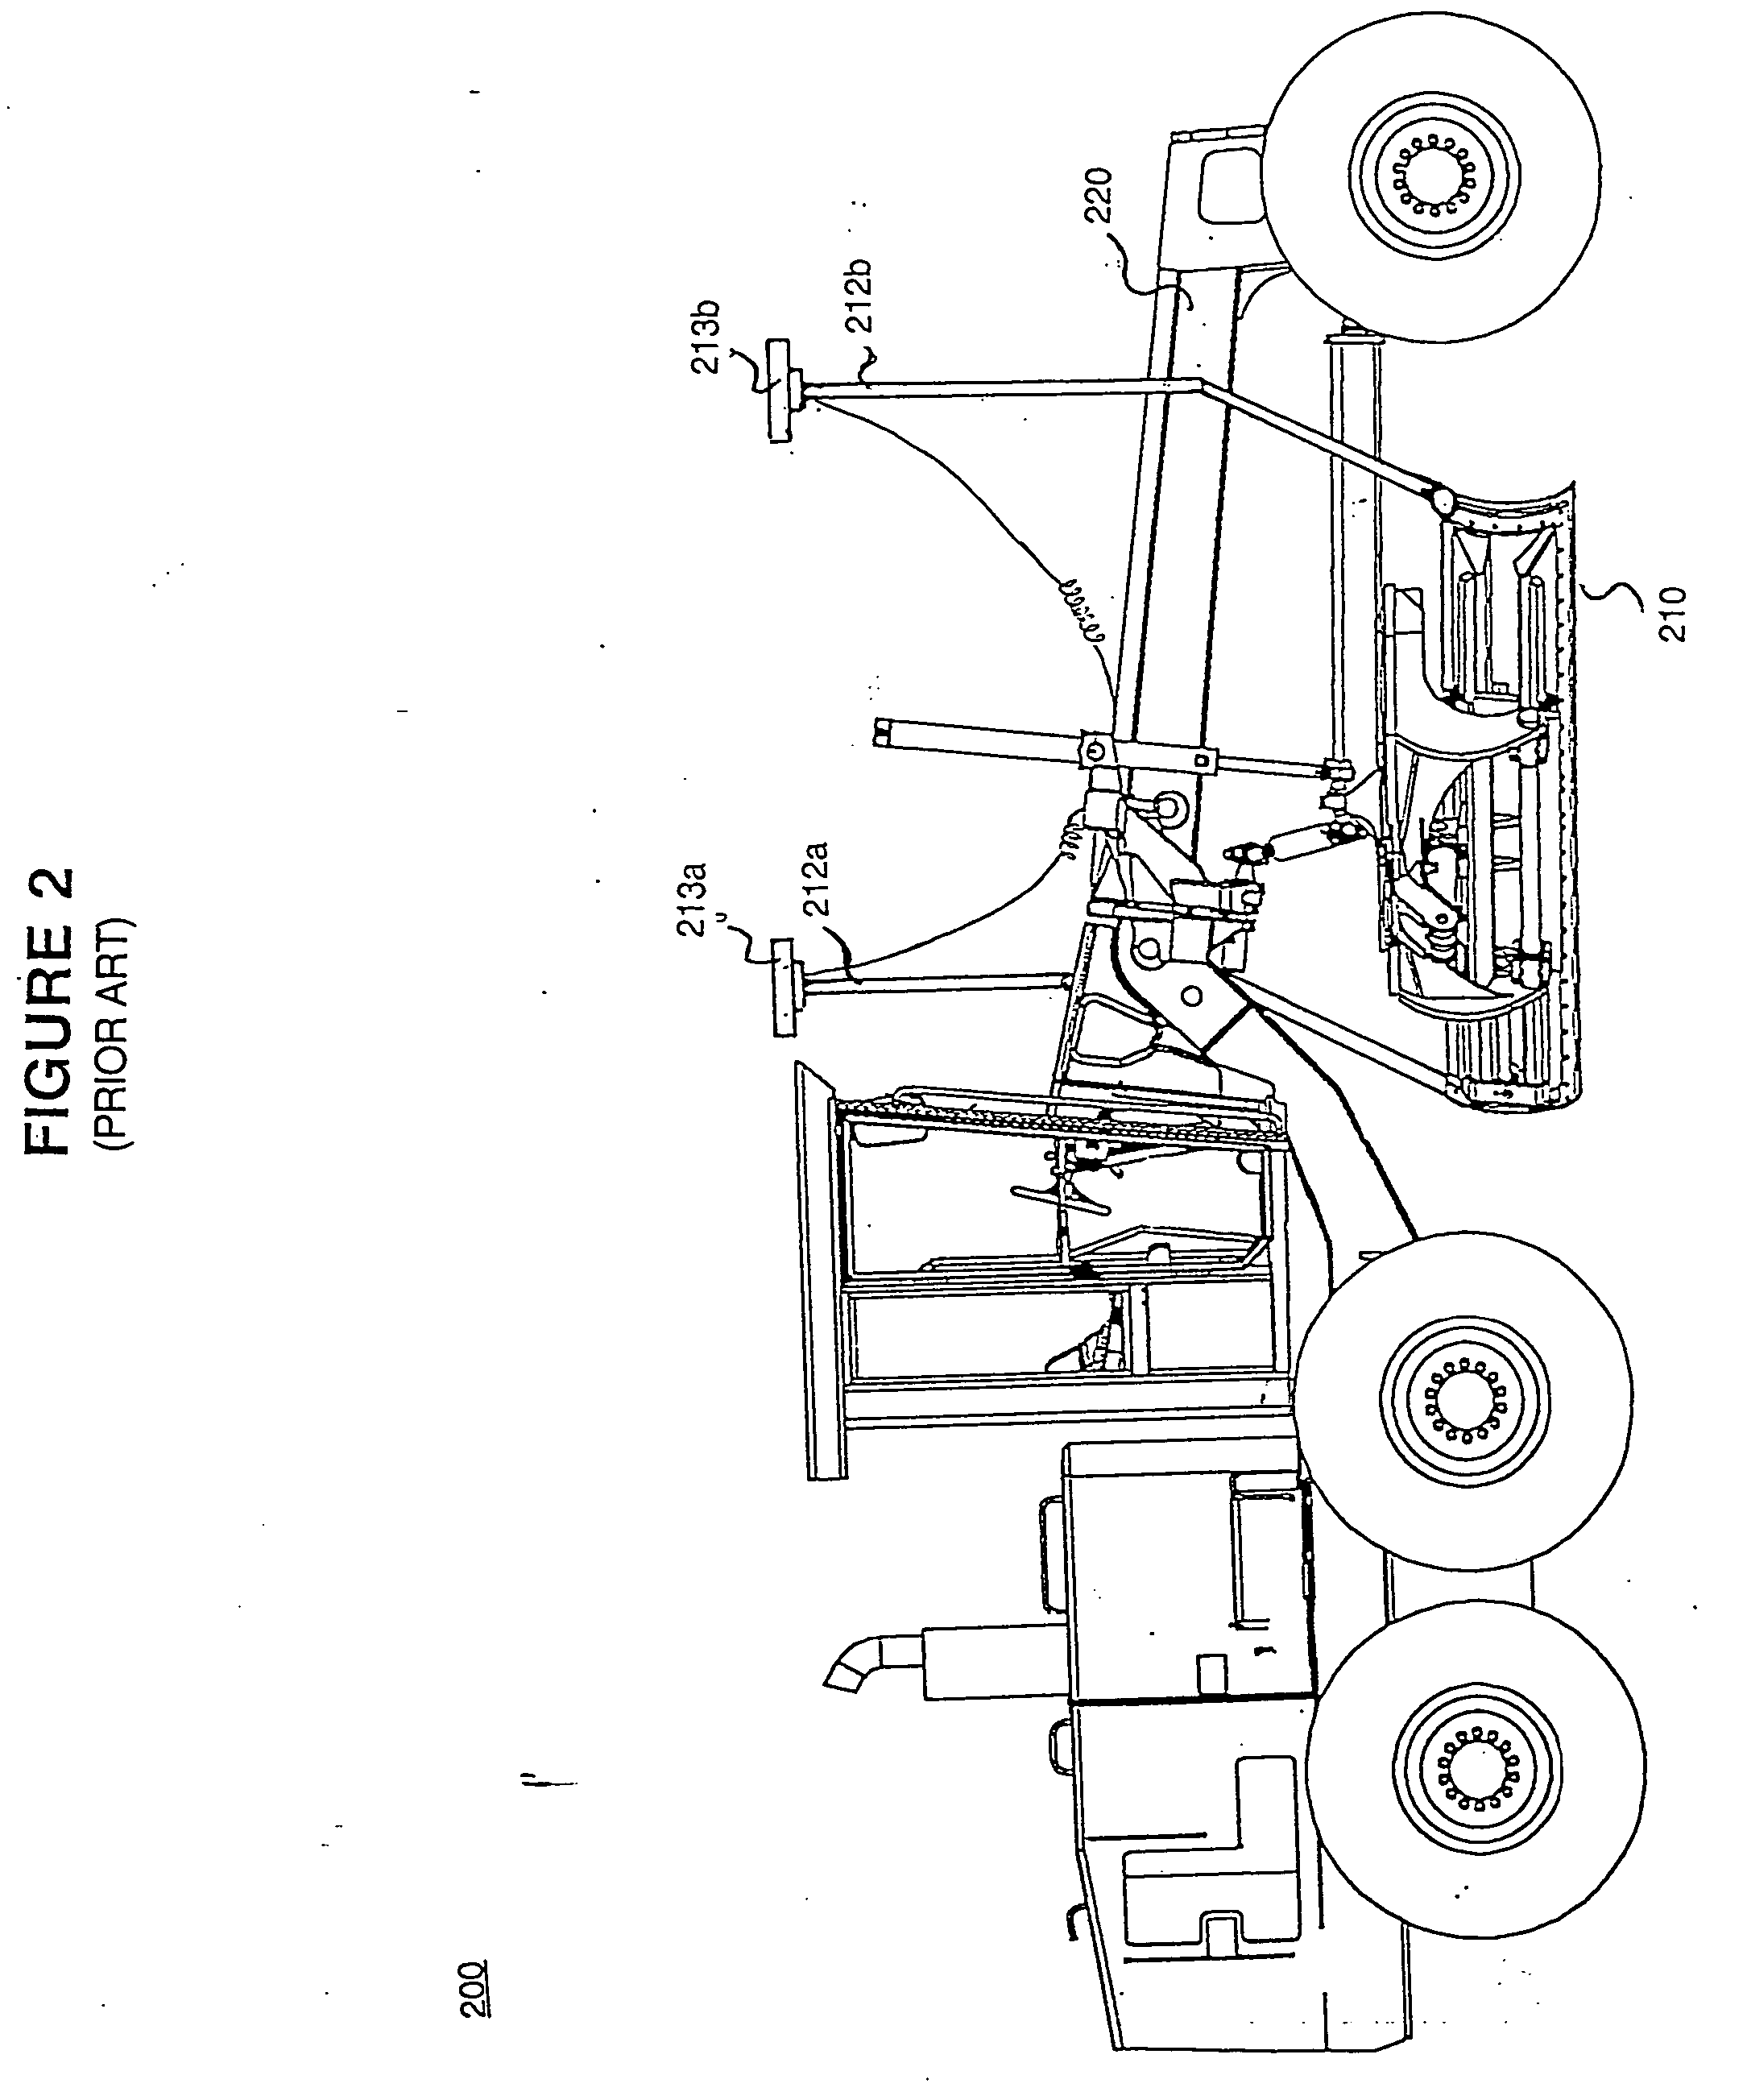 Method and system for performing non-contact based determination of the position of an implement